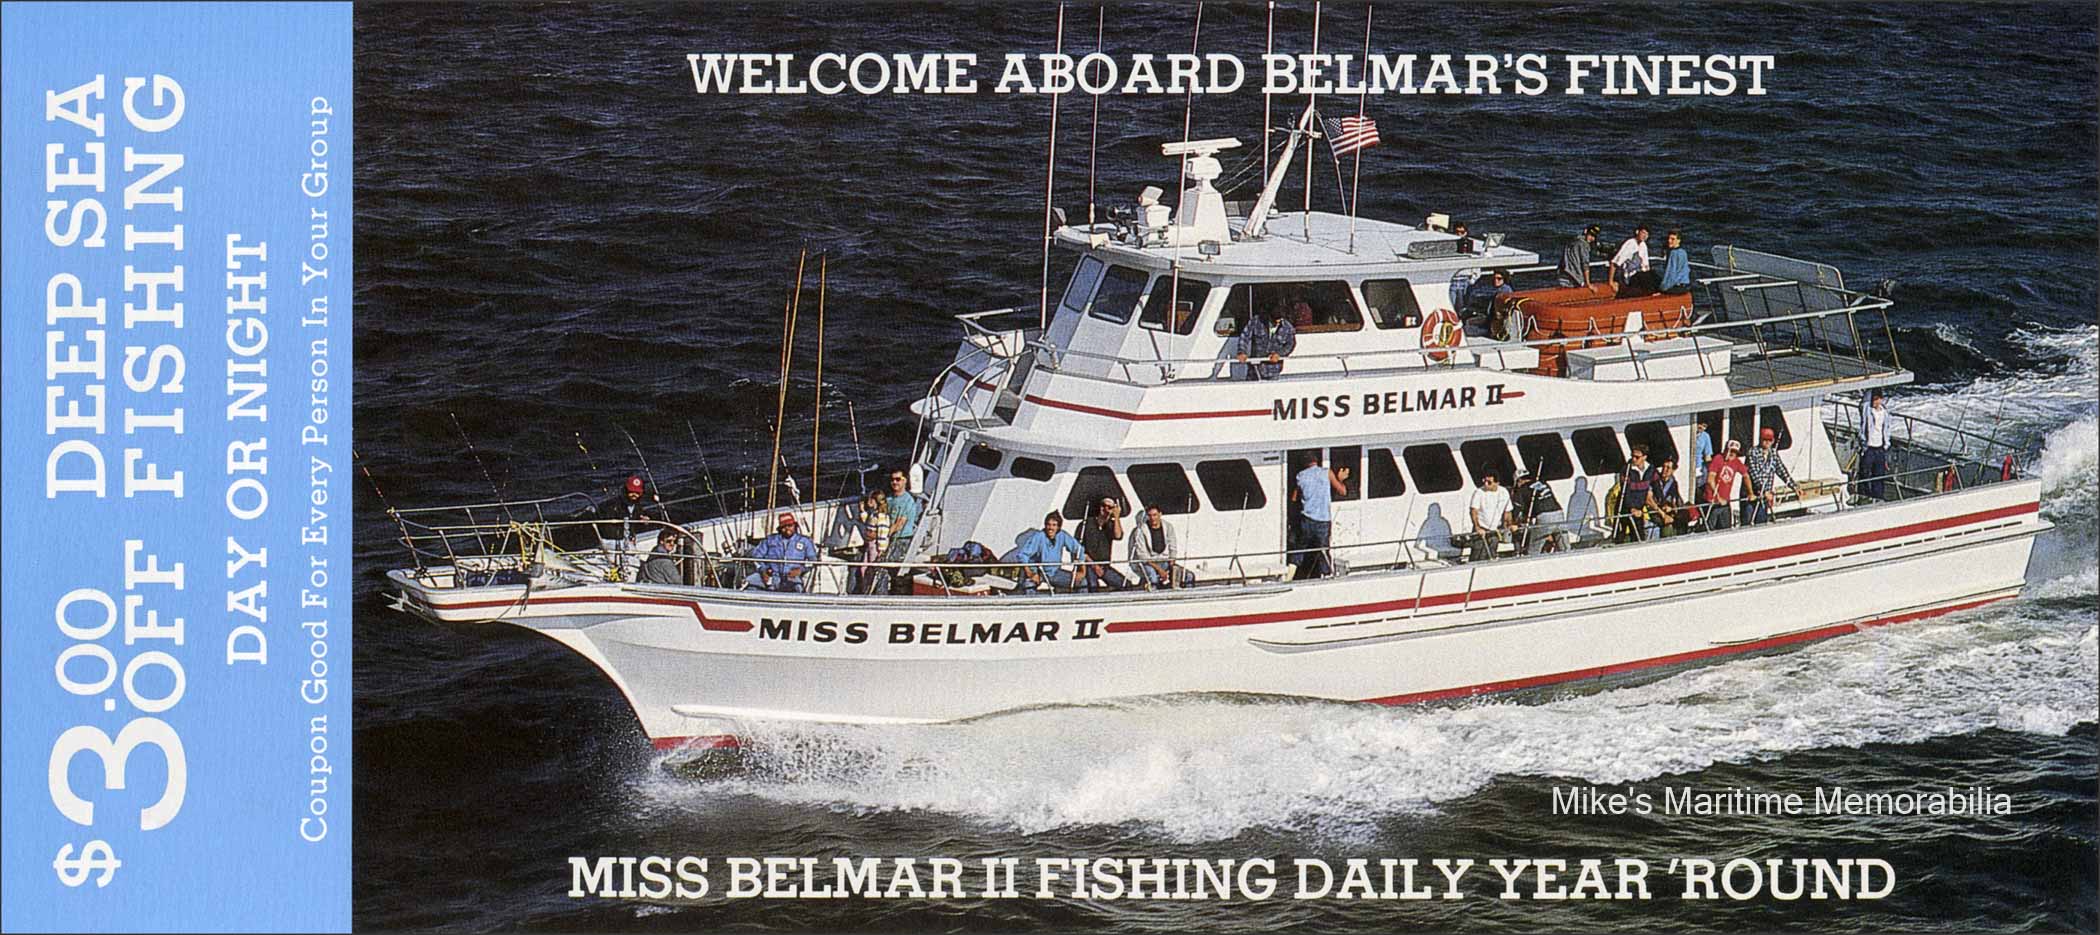 MISS BELMAR II Rack Card, Belmar, NJ – 1989 The "MISS BELMAR II" from Belmar, NJ circa 1989. This speedy triple-screw vessel was built in 1978 by Lydia Yachts at Stuart, FL as Captain Pete Pearson's "KLONDIKE VII" from New Rochelle, NY. She later moved to Florida where she sailed as the "MYSTERY" and later returned to the area when she sailed as the "MISS BELMAR II" from Belmar, NJ. In 1991, she became the "FREDDY-C" from Leonardo, NJ and in 2009 she became Captain Charlie Buser's "CAPTREE STAR III" from Captree, NY. In 2021, she became Brendan Lorino's "SOUND BOUND STAR" from New Rochelle, NY.